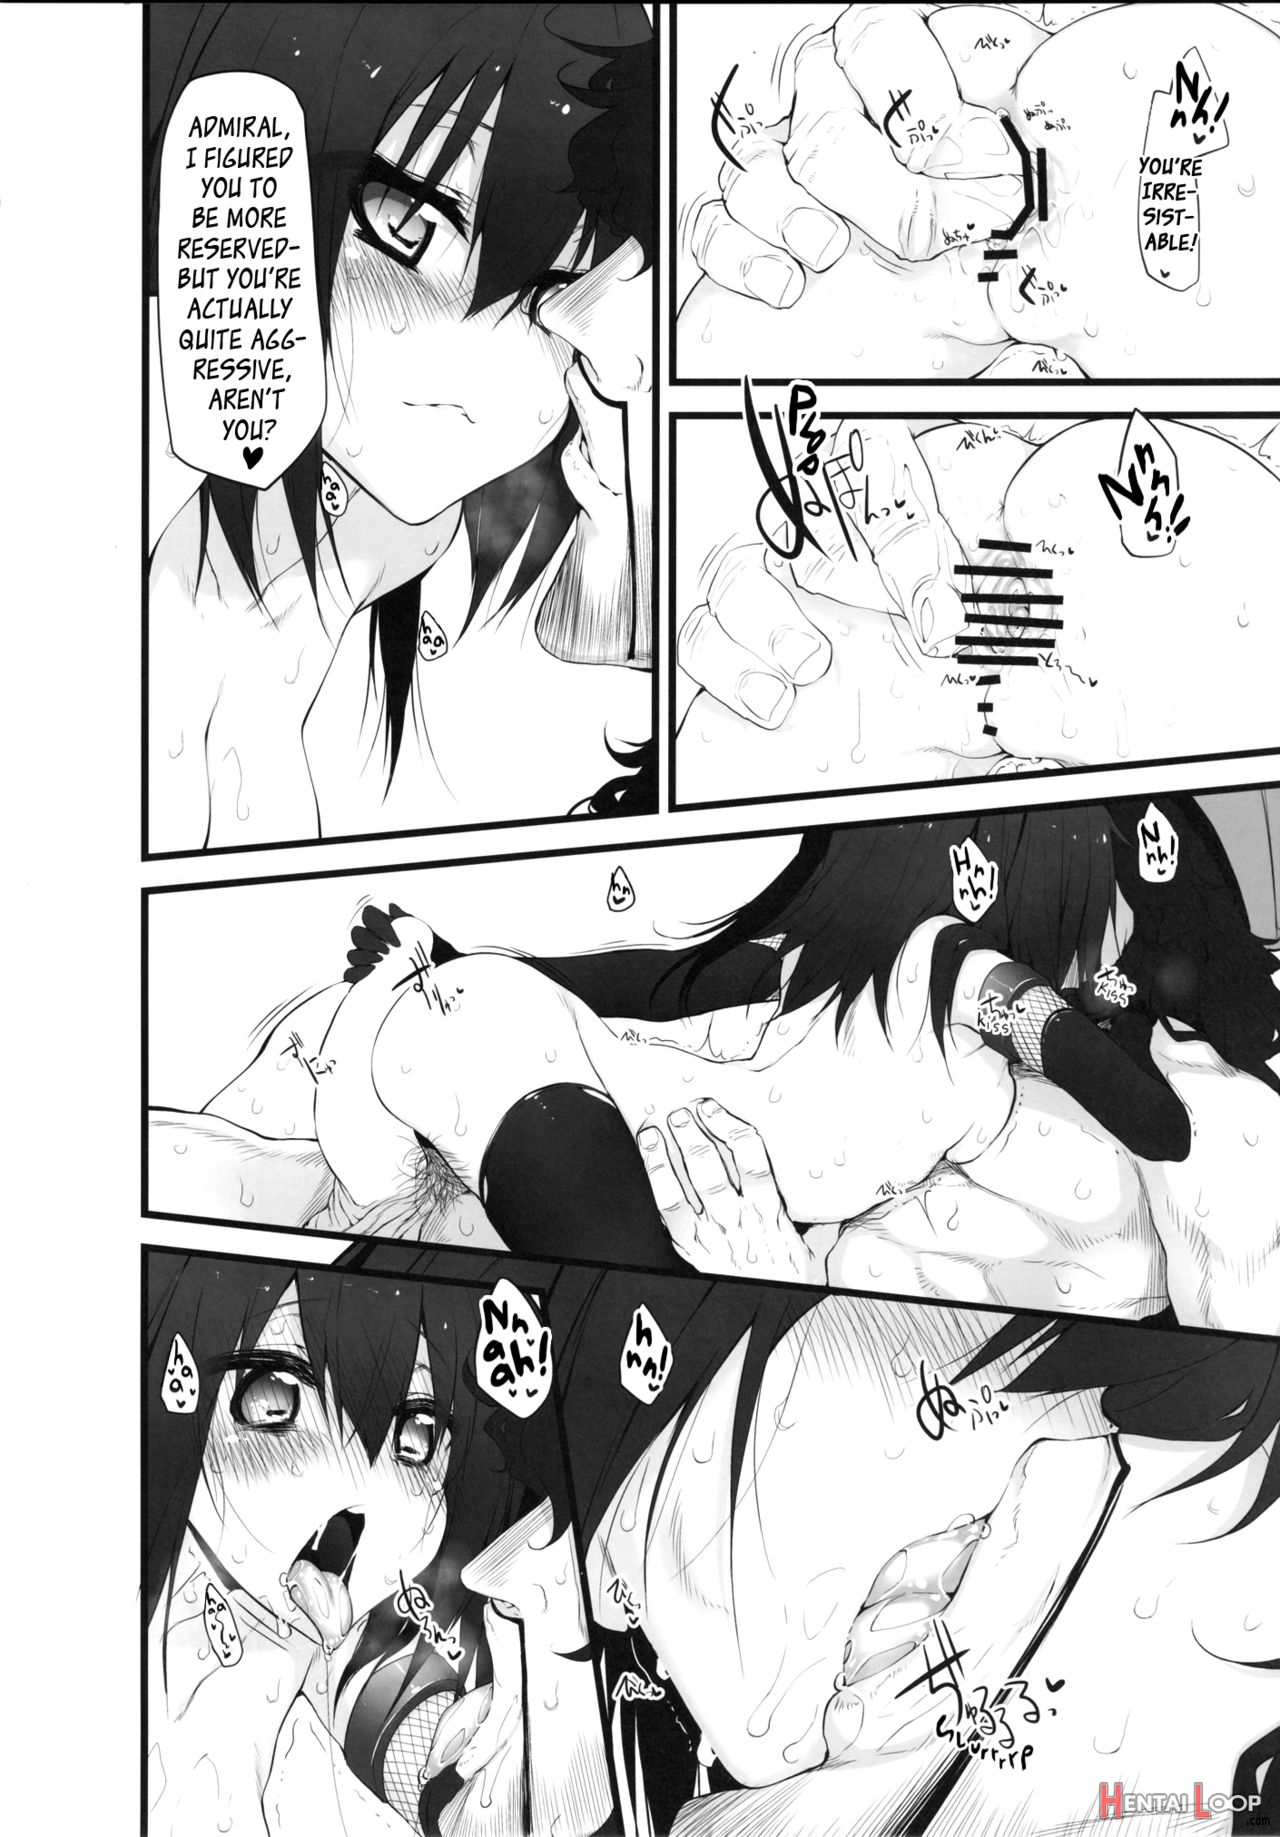 Marked Girls Vol. 4 page 6